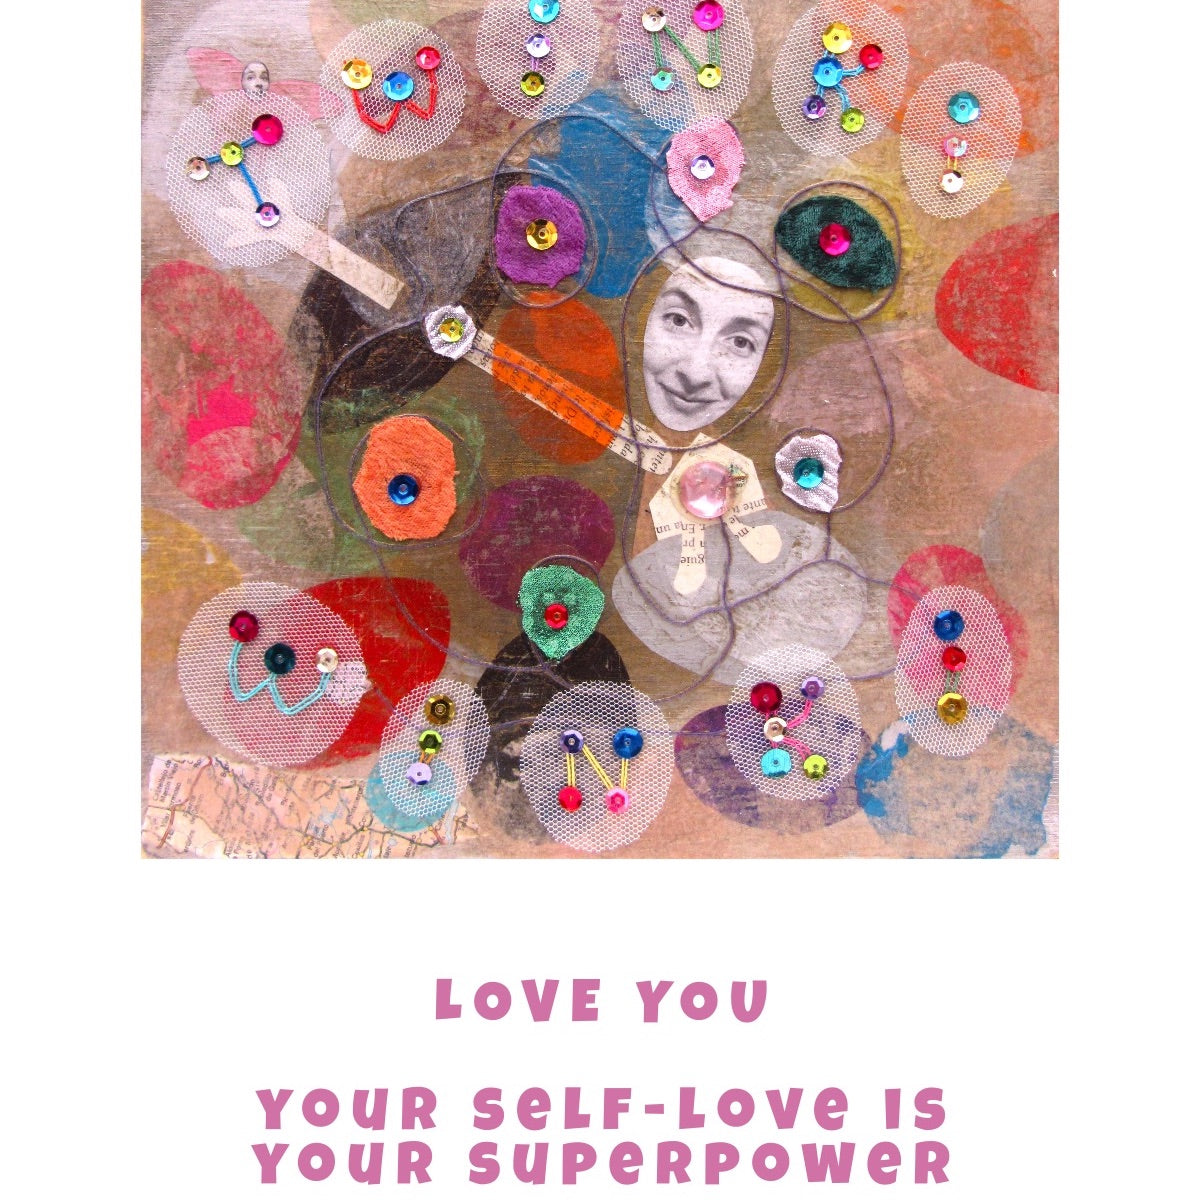 Fine art print of Alex Mitchell’s happy face surrounded by colorful shapes and textures with positive self-love text message.